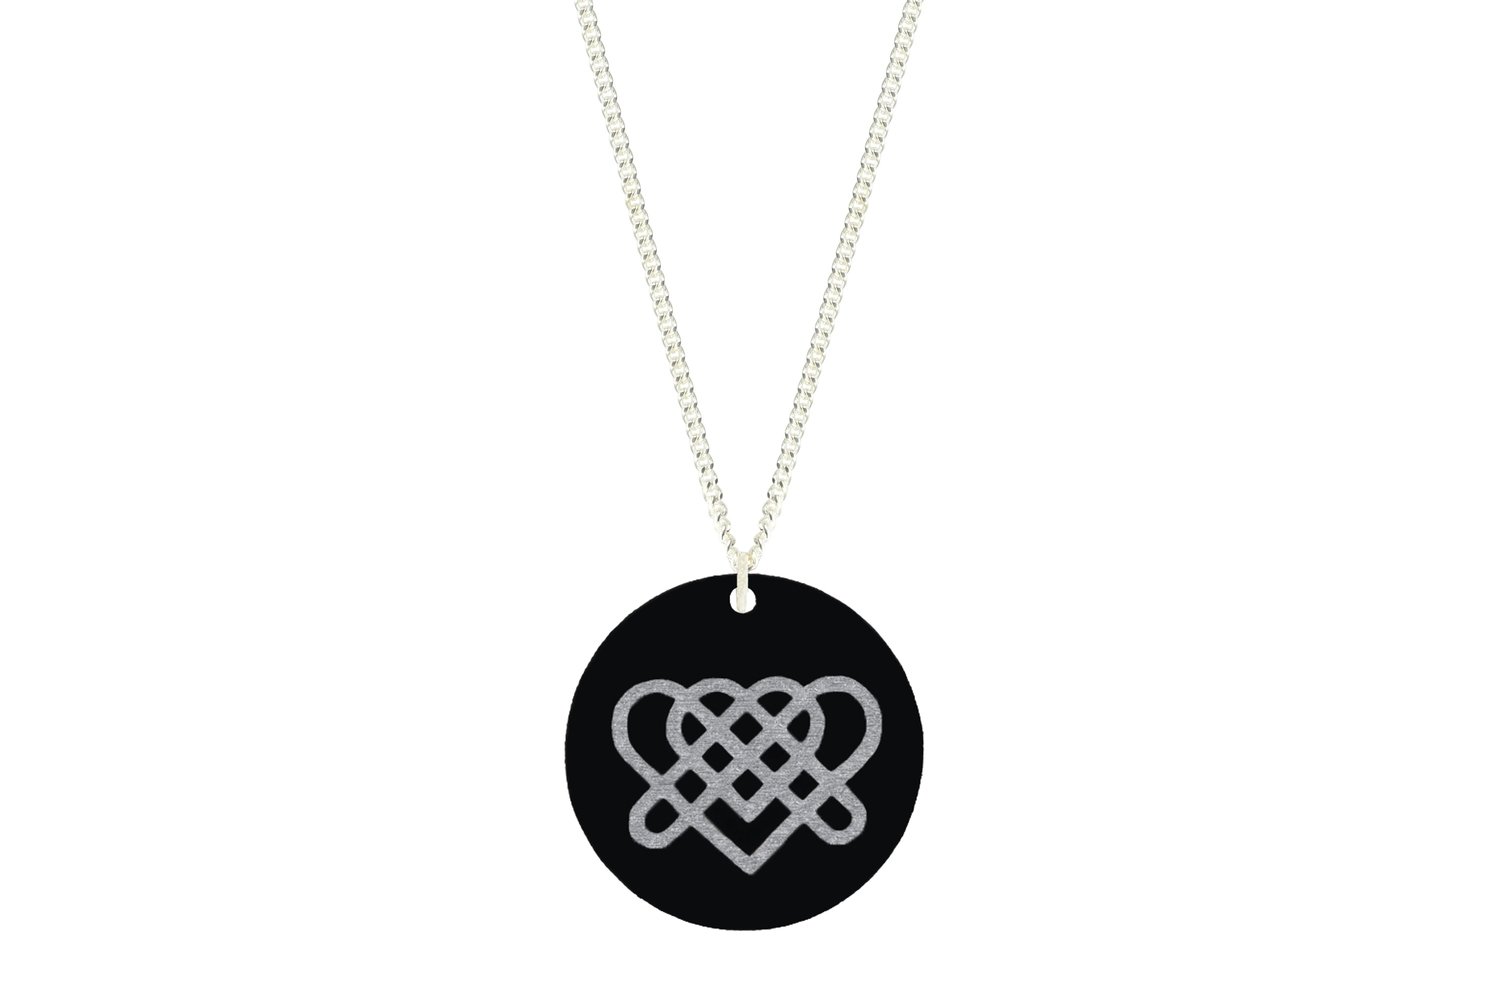 Heart Knot Celtic Symbol Pendant Subtle Style Refined with Paint on Chain Necklace